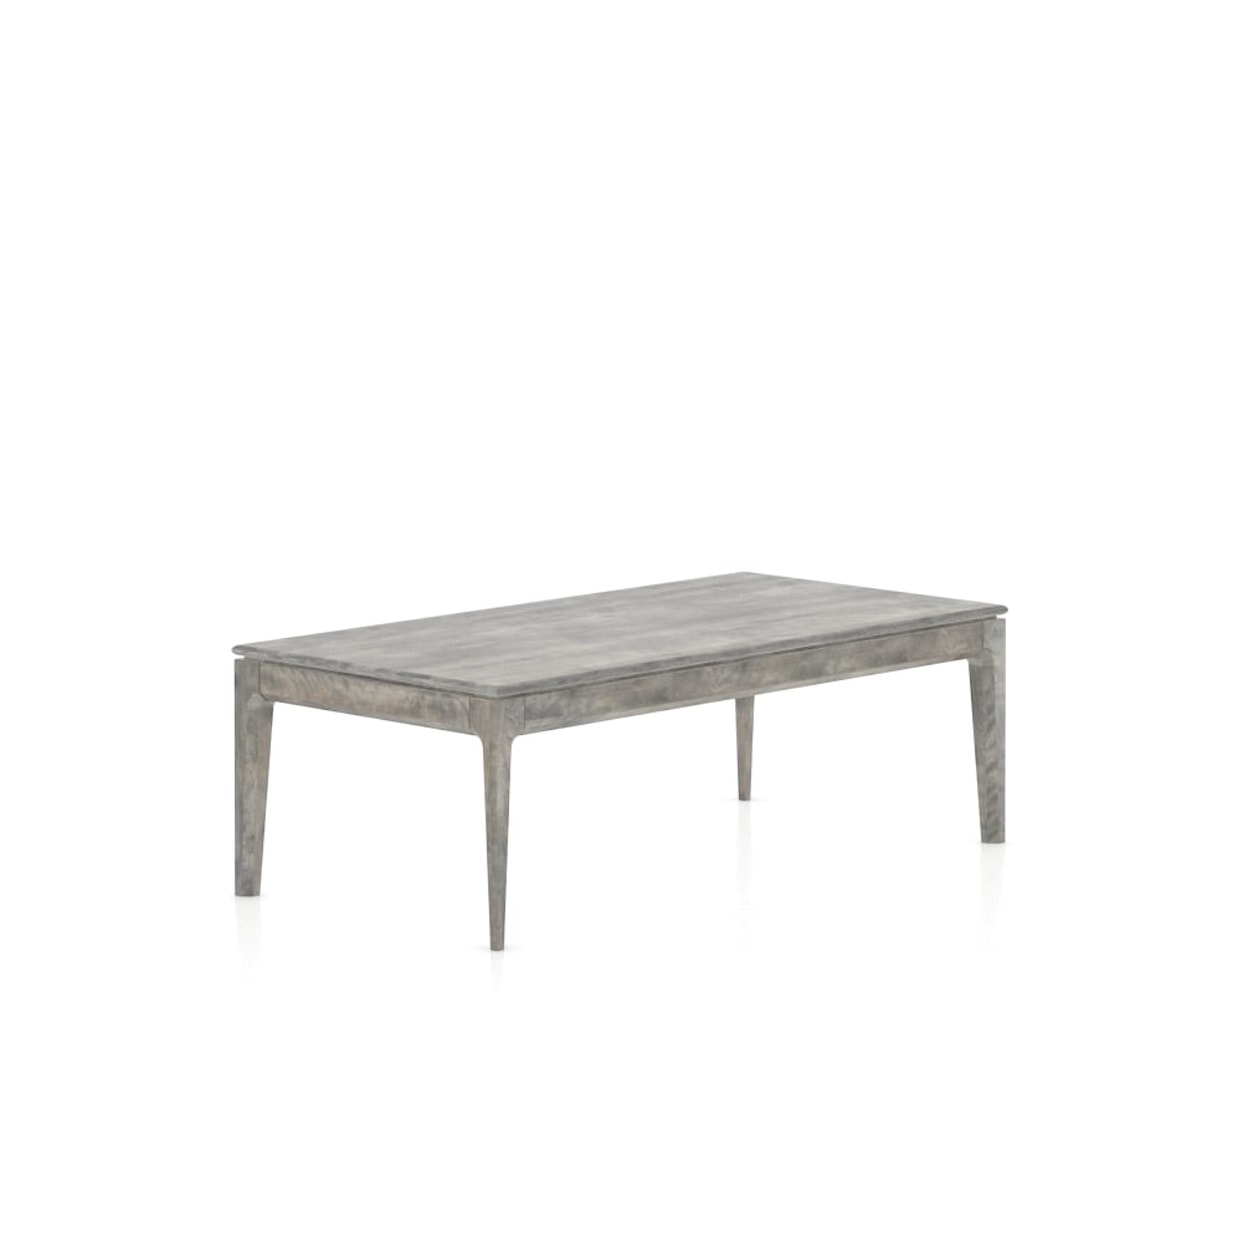 Canadel Accent Essence Rectangular Coffee Table